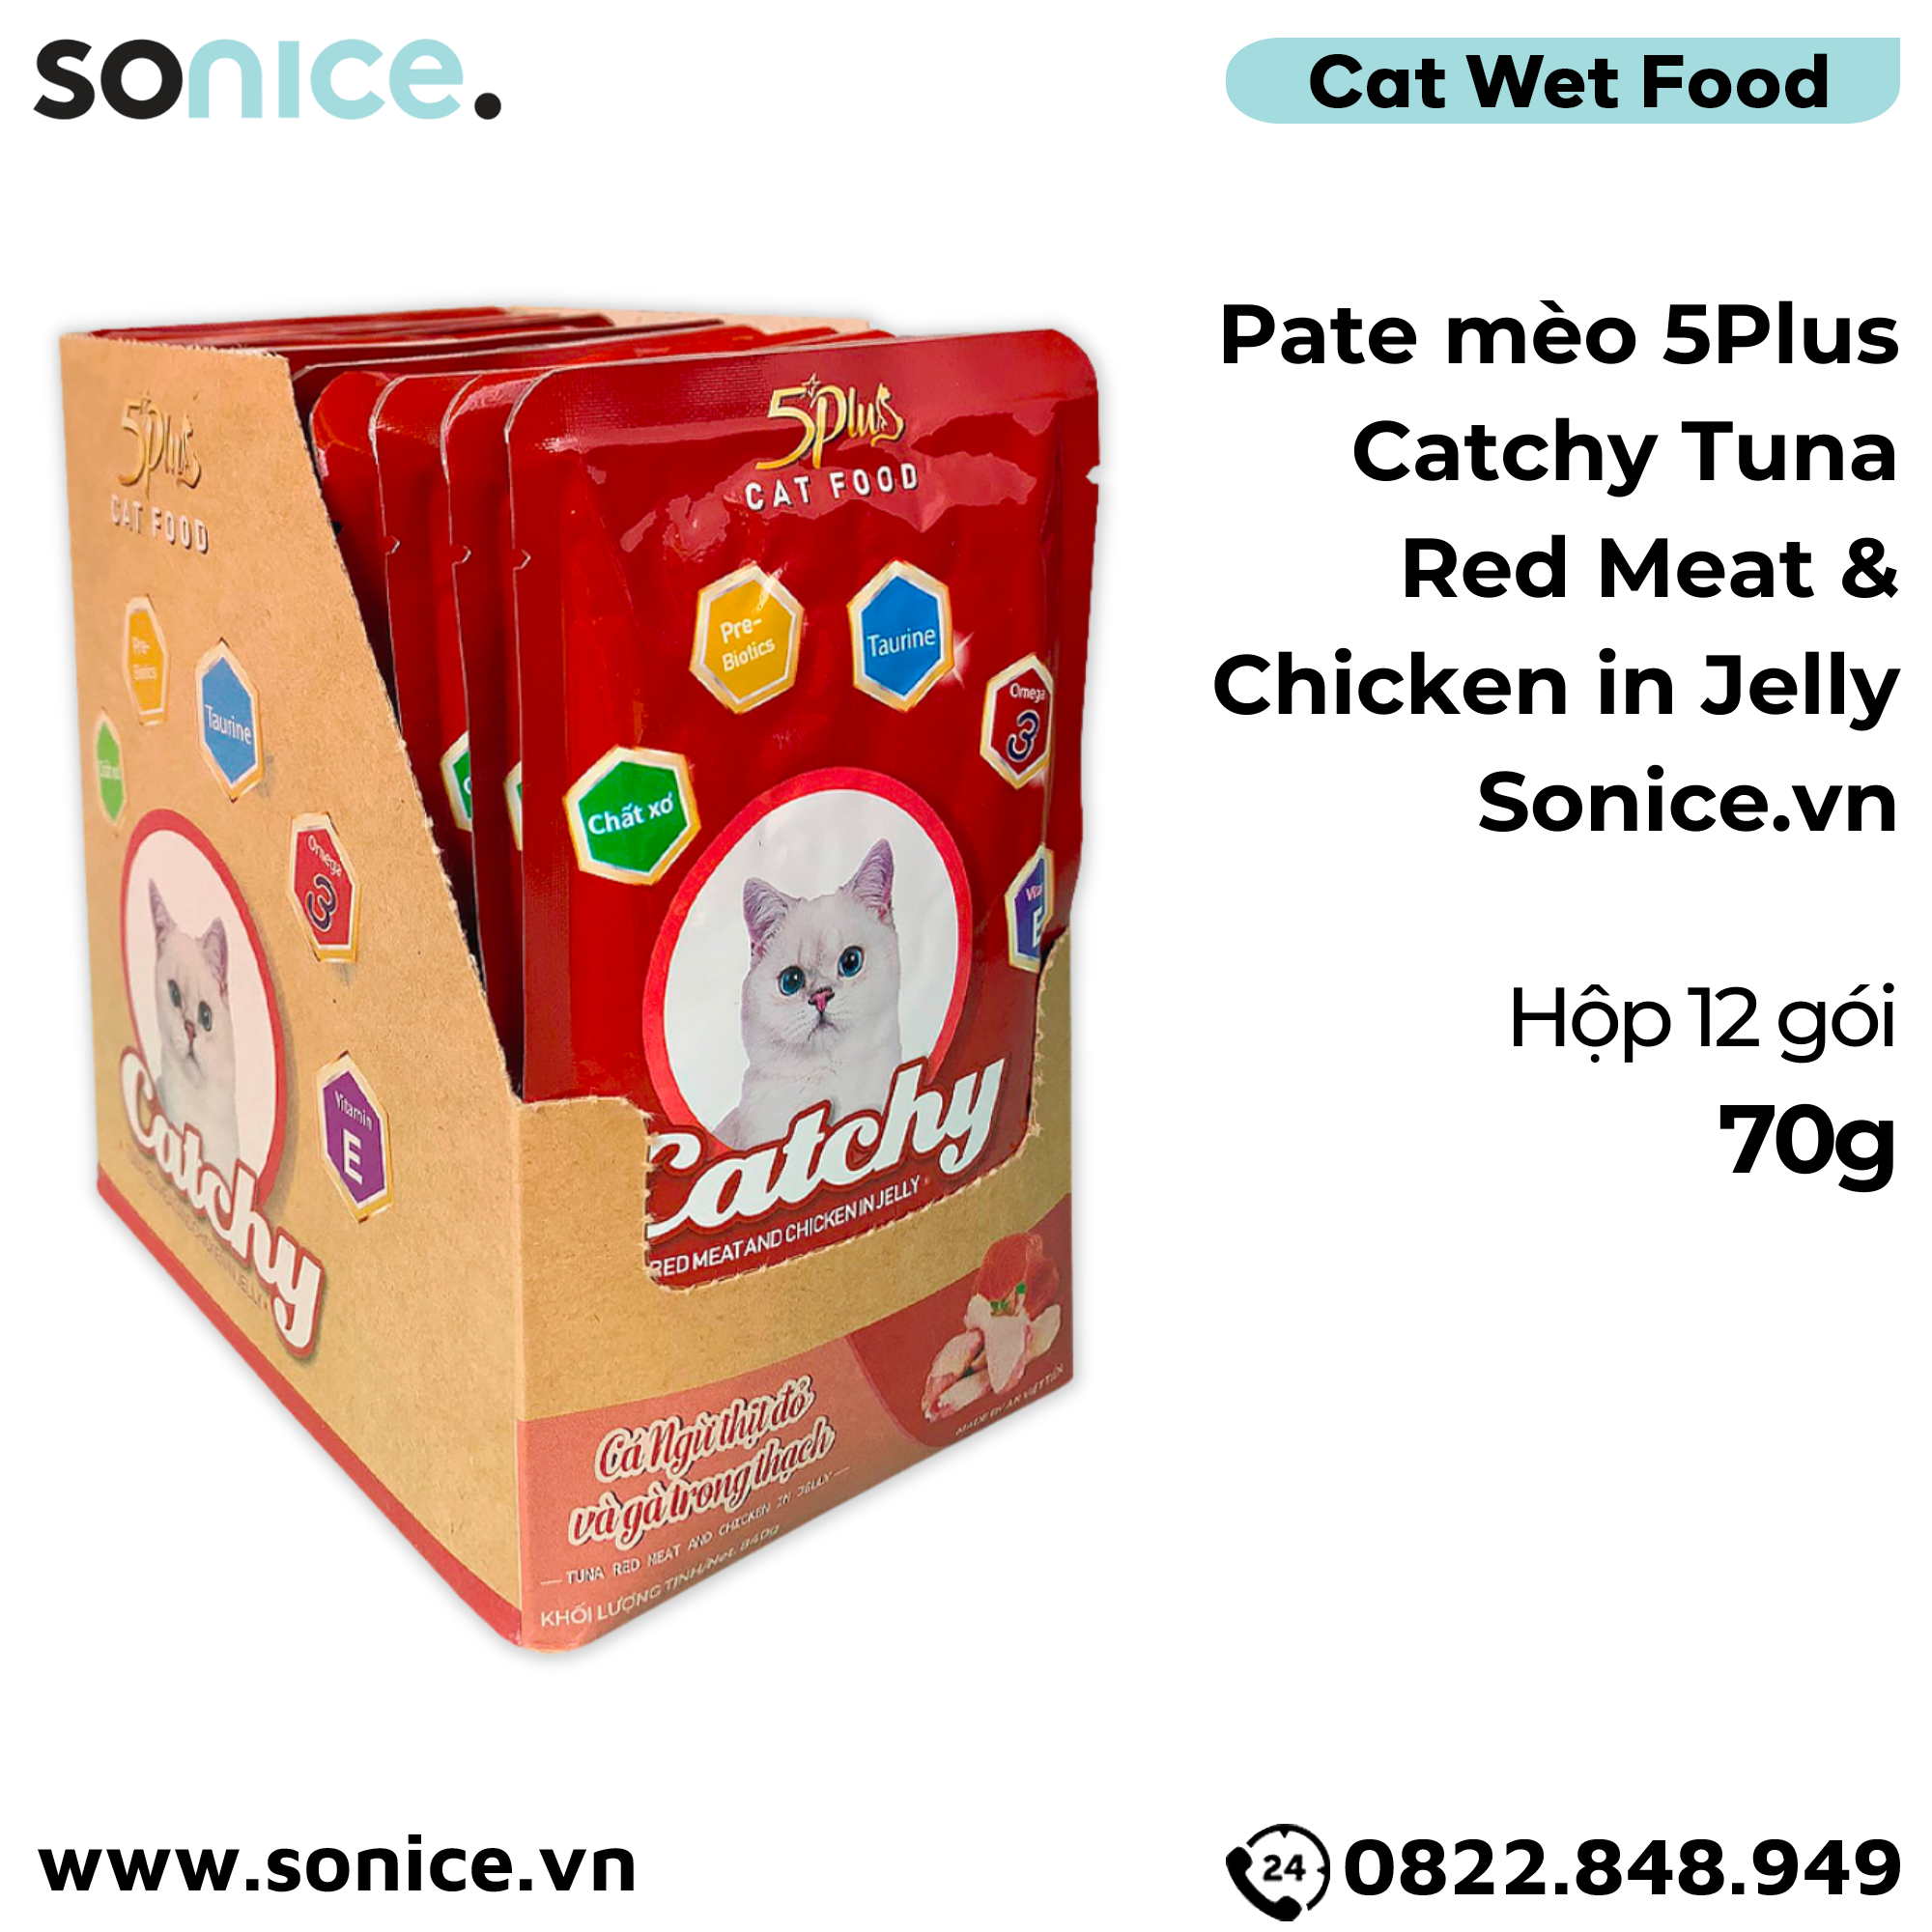  Pate mèo 5Plus Catchy Tuna Red Meat & Chicken in Jelly 70g - Hộp 12 gói SONICE. 